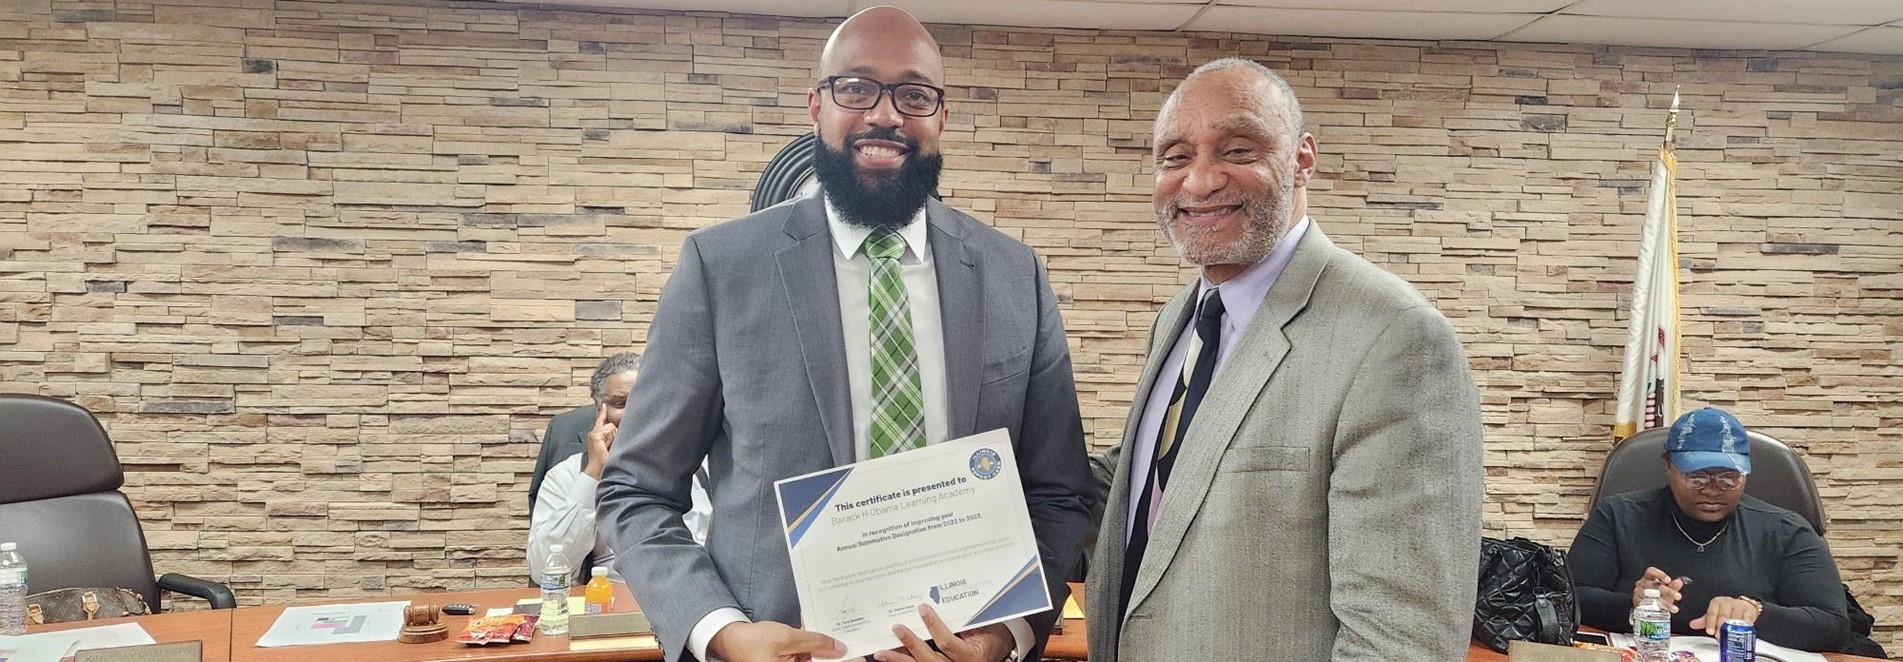 Mr. Jones accepts a certificate of recognition for improving student achievement from the Illinois State Superintendent! Congratulations BOLA!